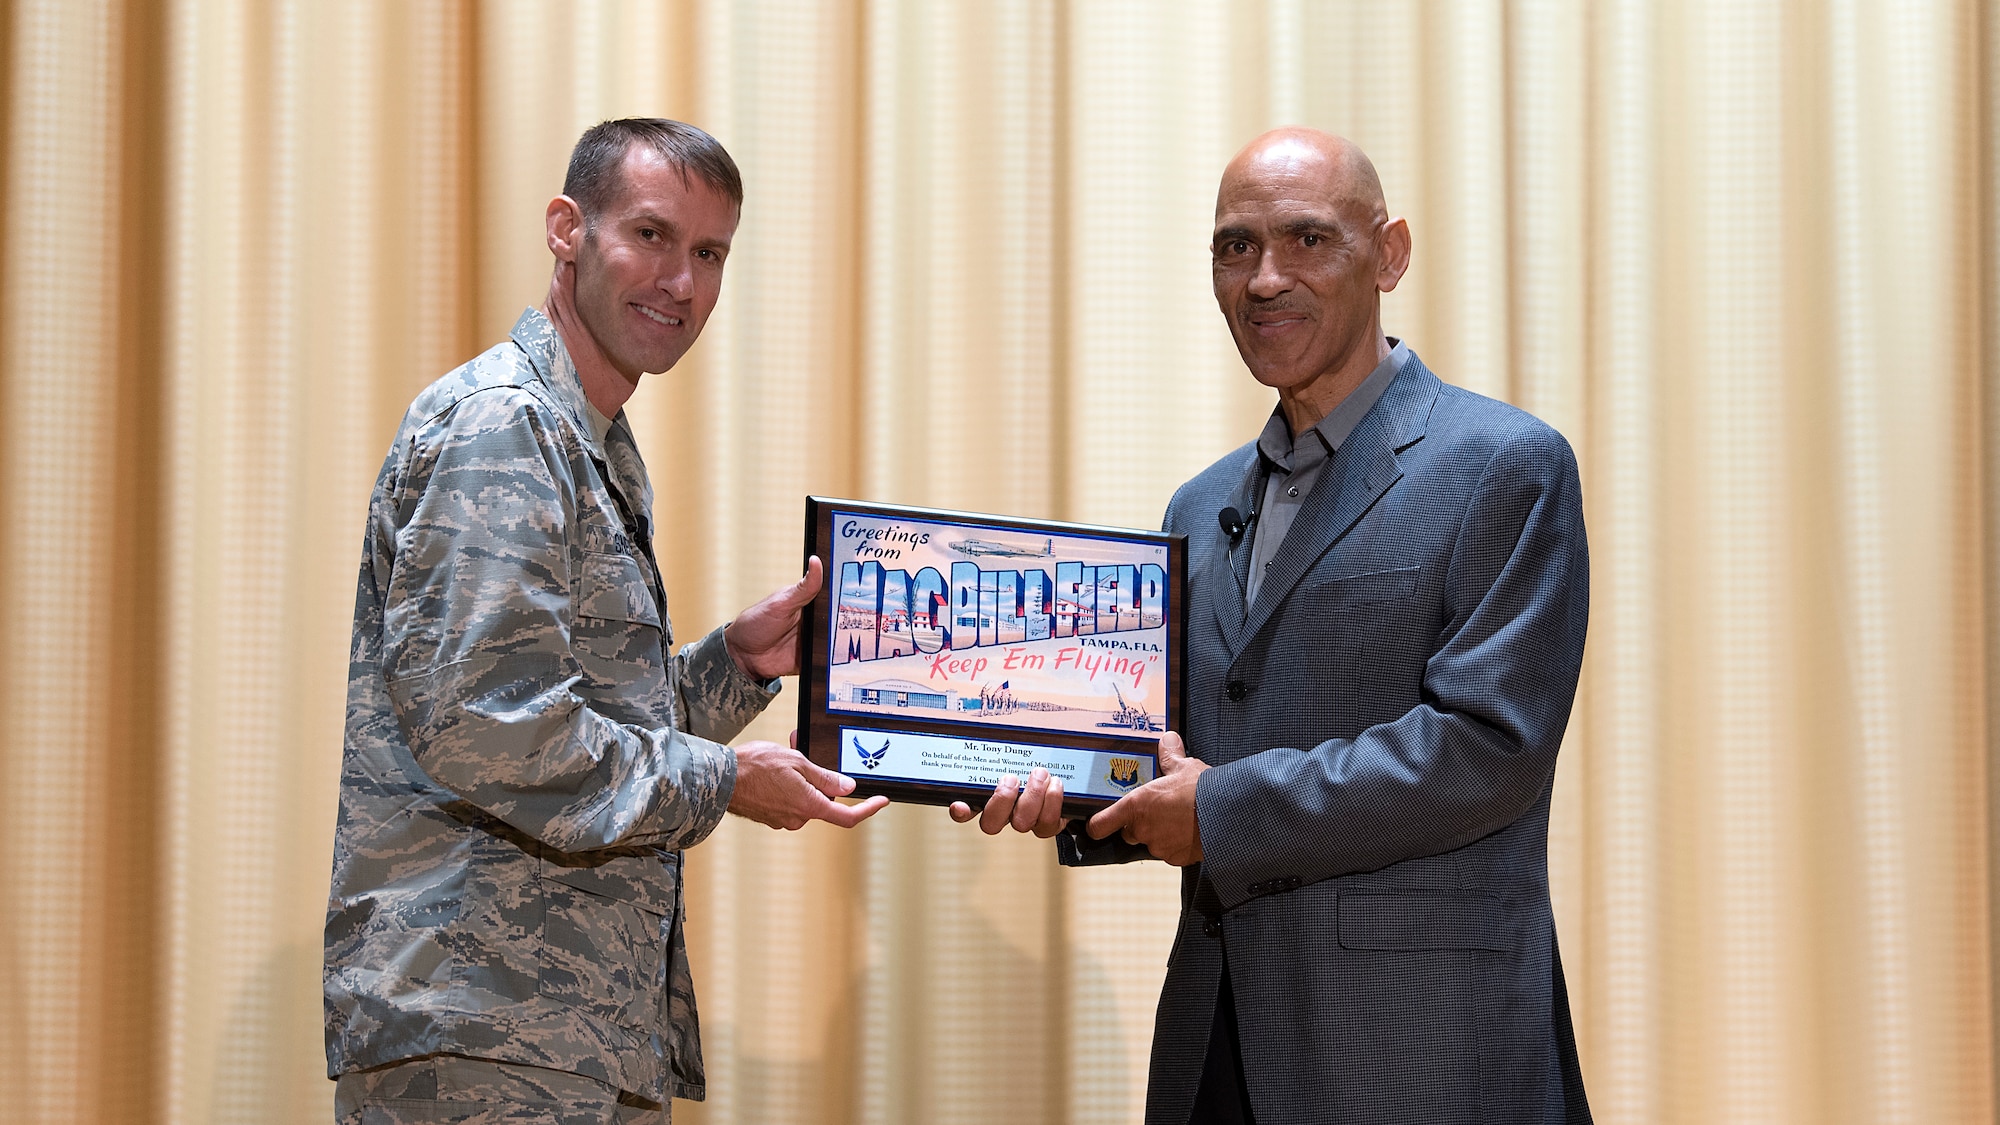 U.S. Air Force Col. Stephen Snelson, the 6th Air Mobility Wing commander, presents former National football League head coach, Tony Dungy, a plaque in appreciation for speaking at MacDill Air Force Base, Fla., Oct 24, 2018. The Super Bowl winning head coach and Pro Football Hall of Fame inductee spoke on moments throughout his life that tested his resiliency.